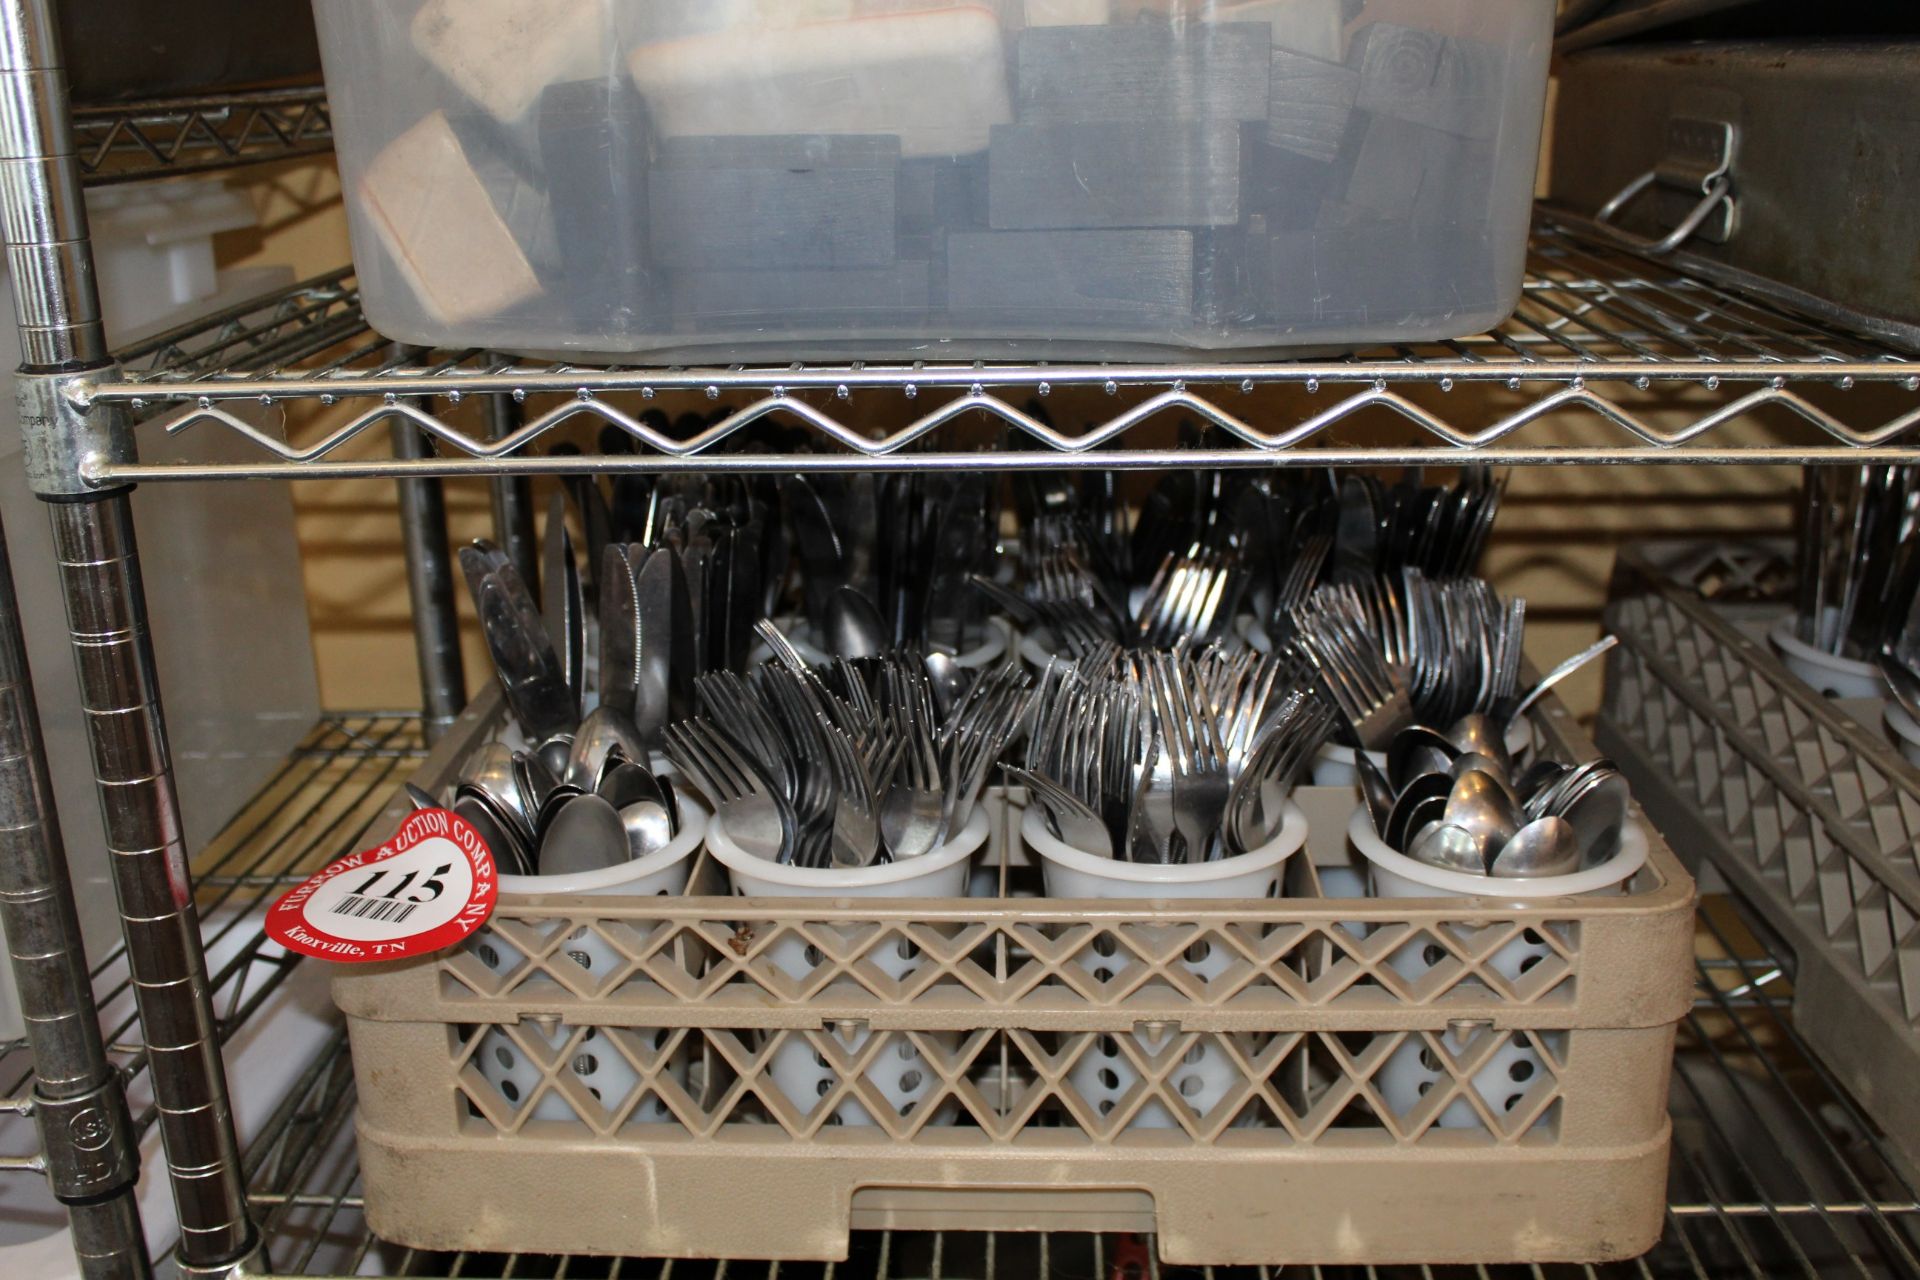 Contents of Containers: Various Forks, Knives, Flatware, Spoons, Etc.